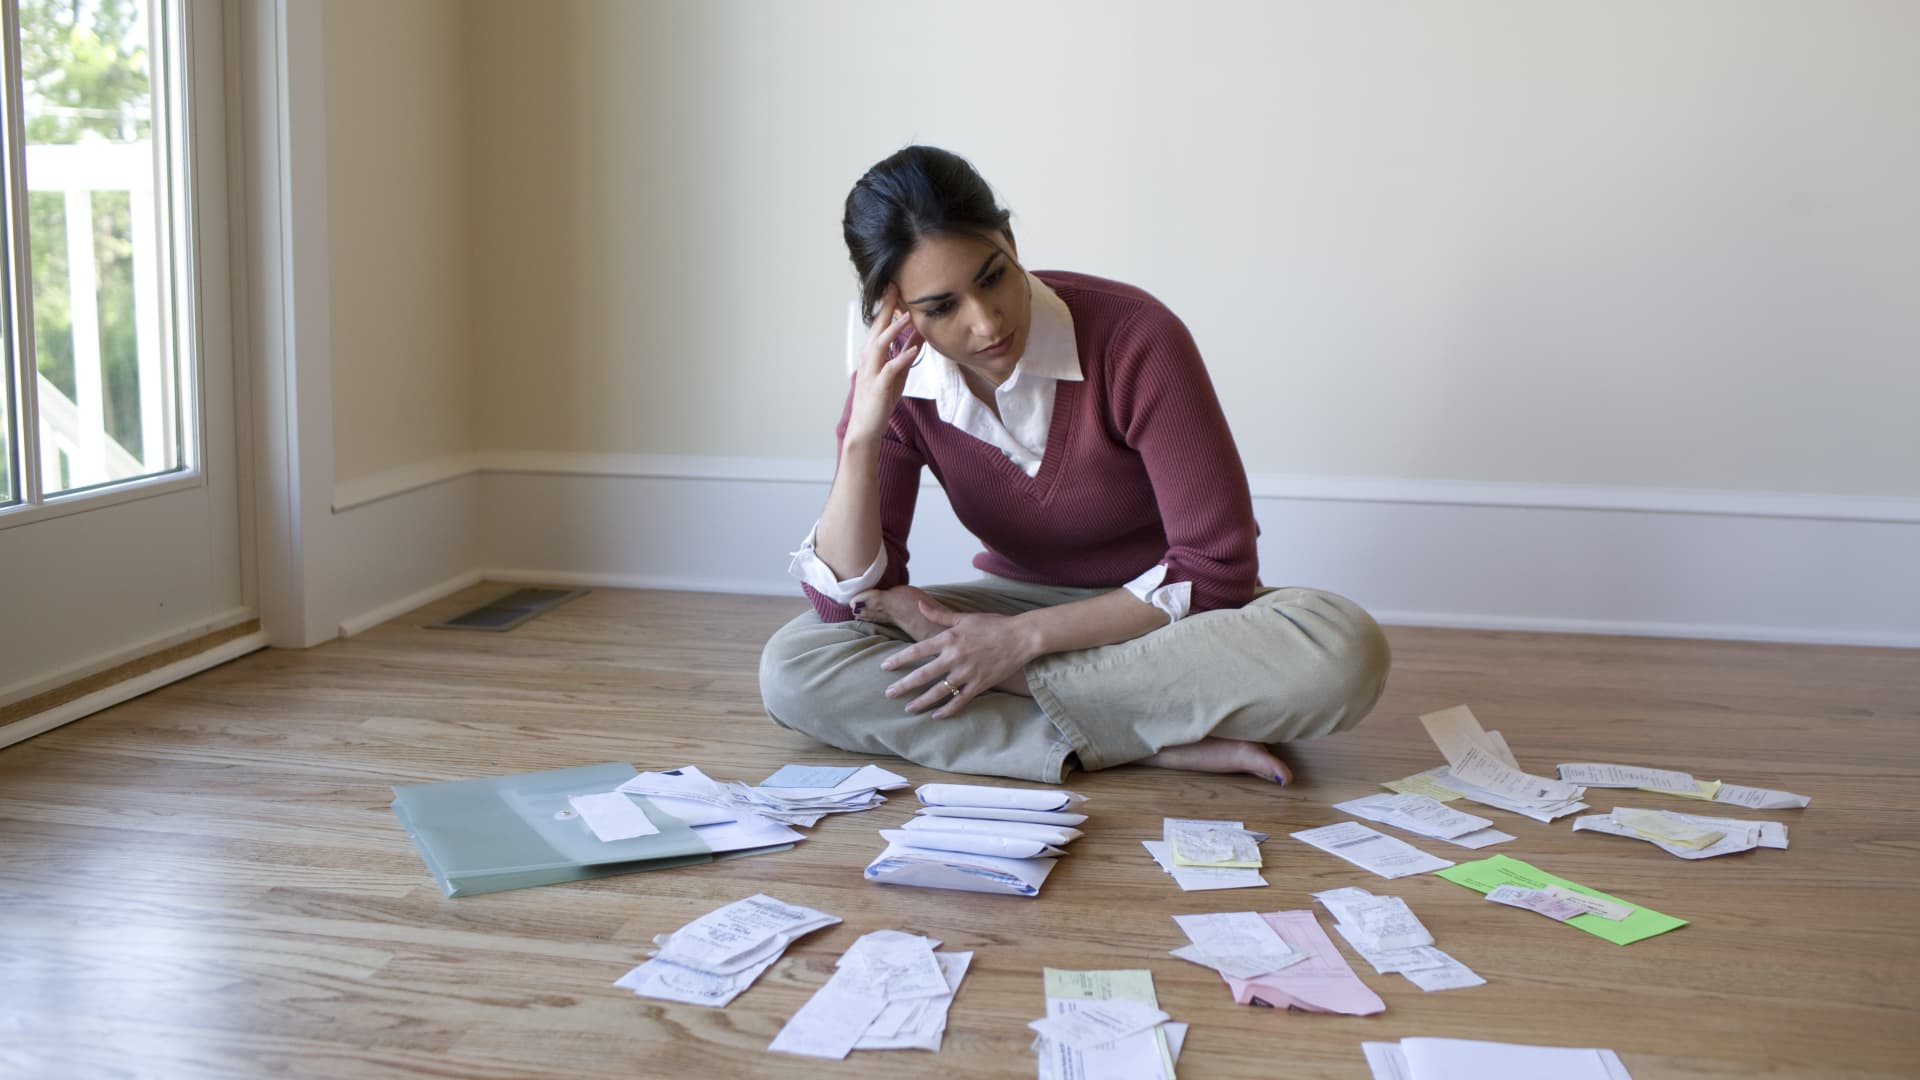 A new report shows American household debt is at all-time highs — here are 5 simple steps to help you pay off your debt